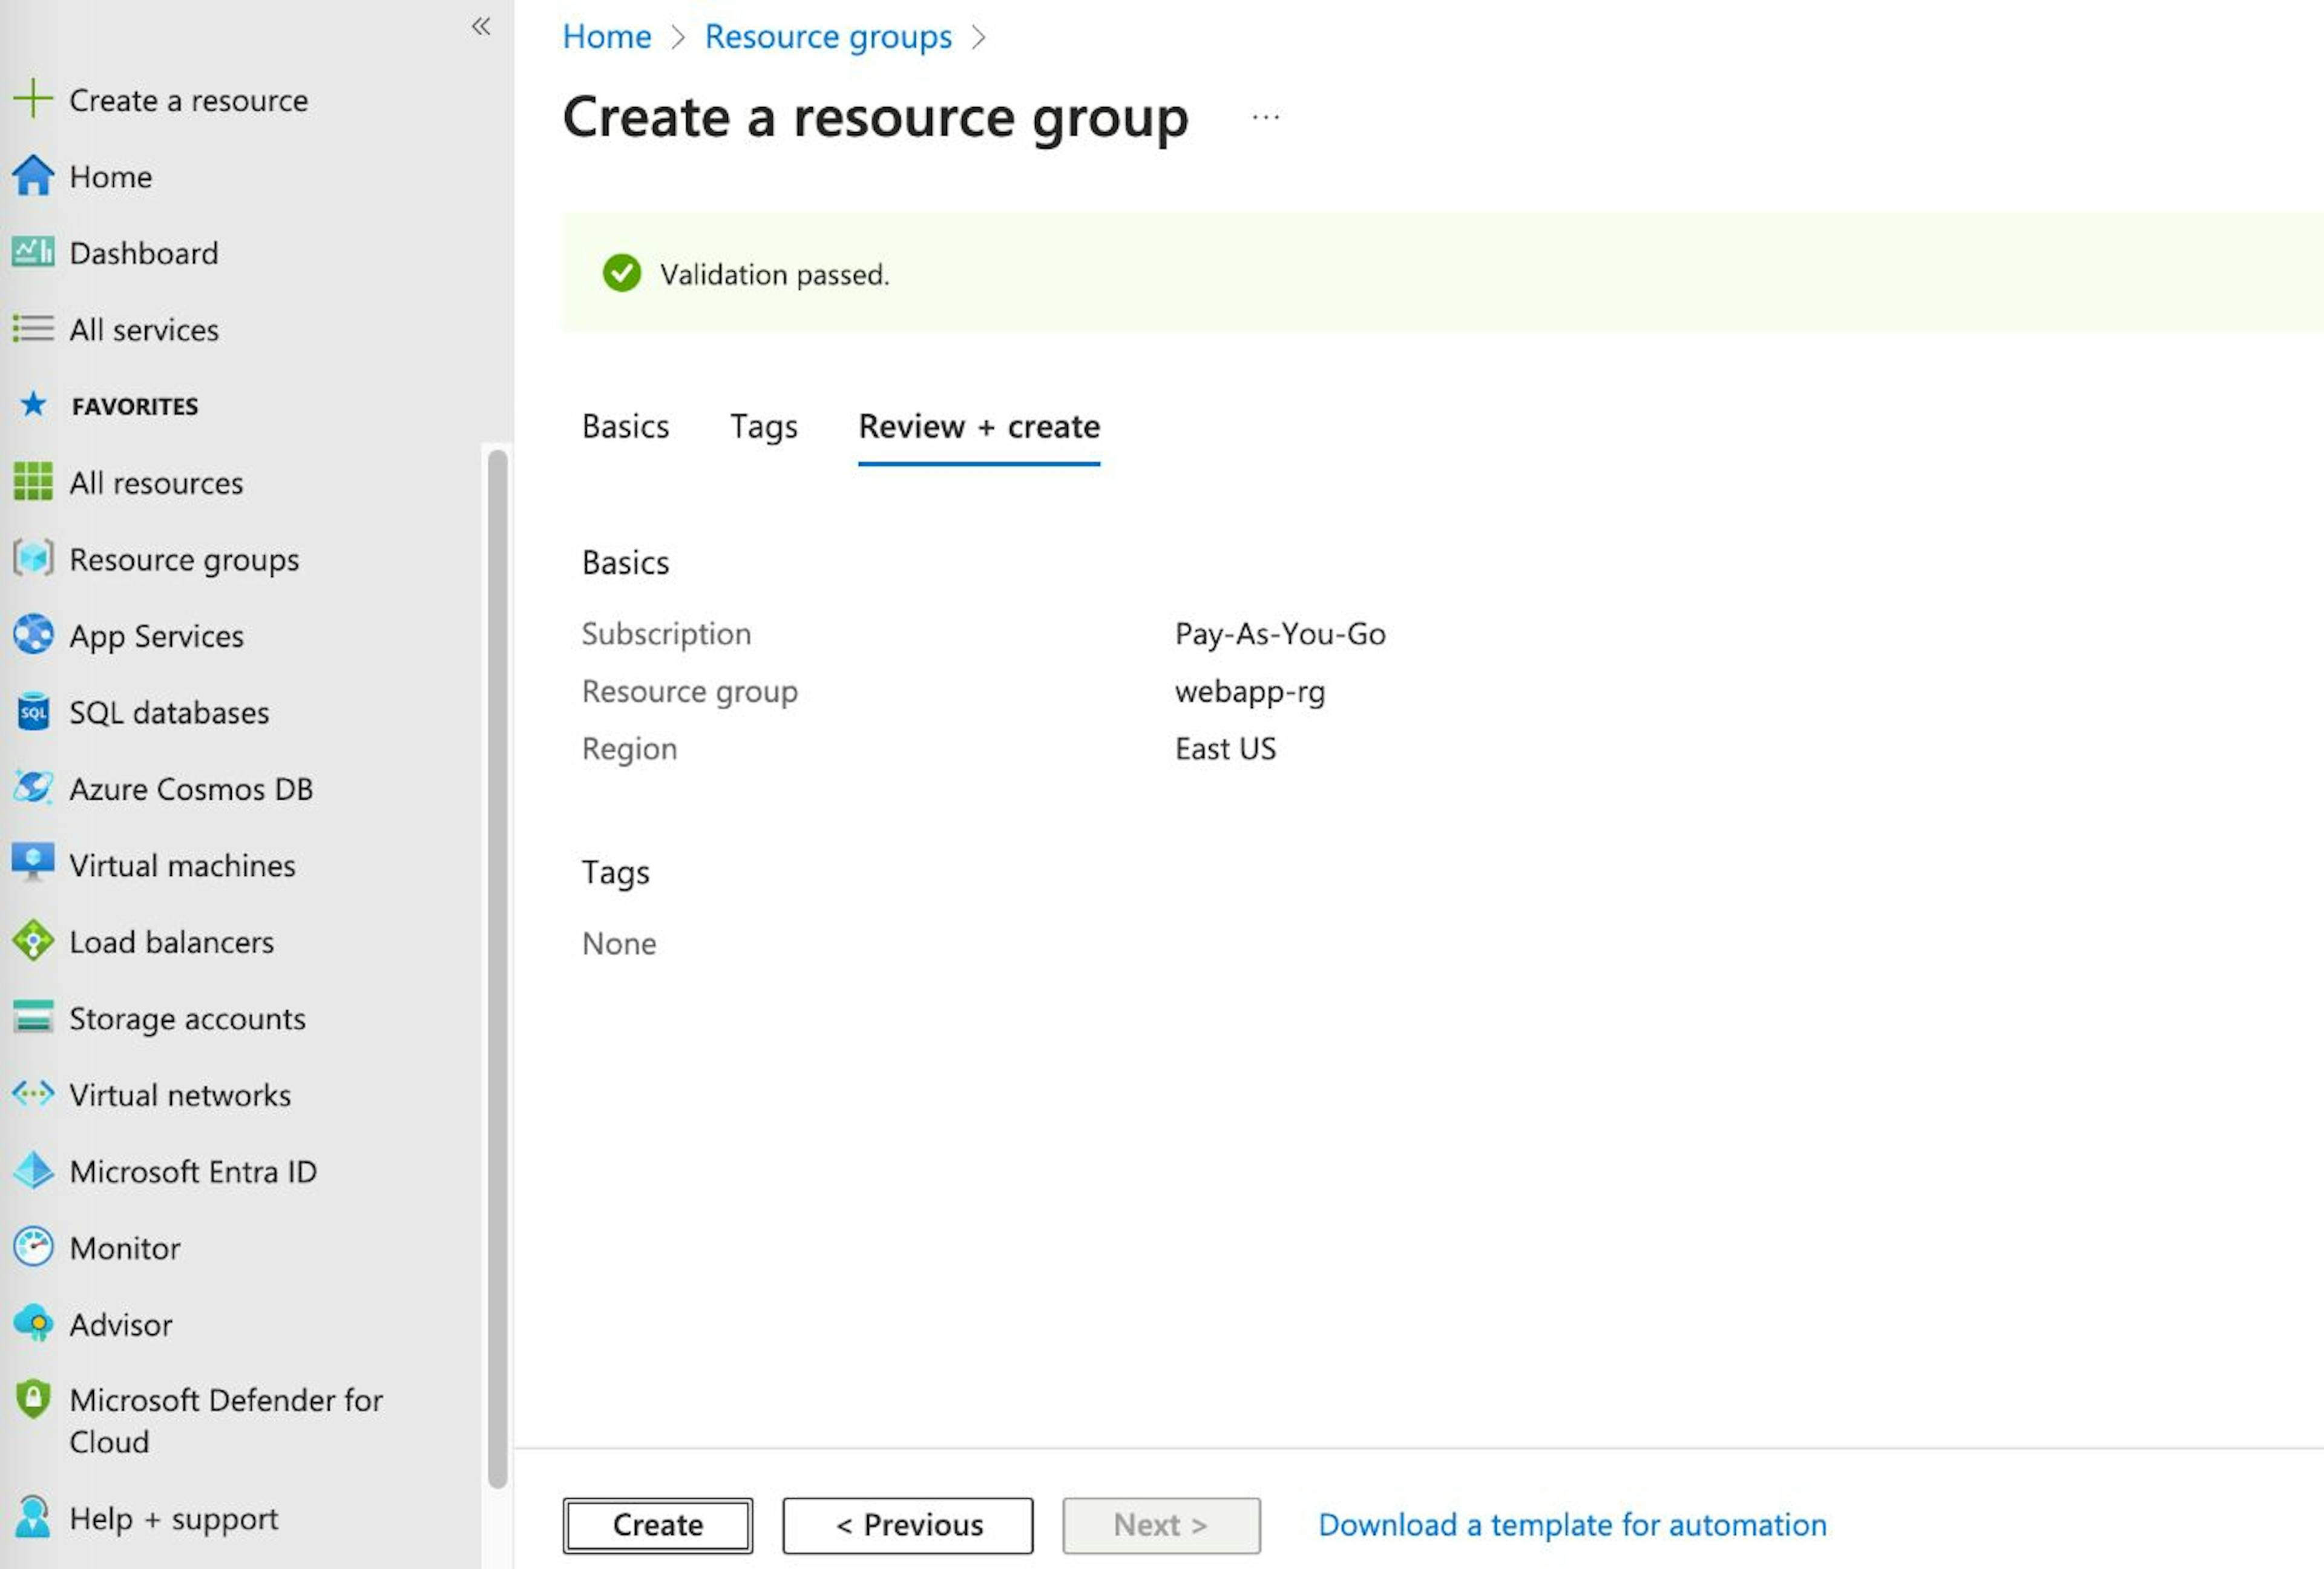 Create Resource Group: Review + create tab